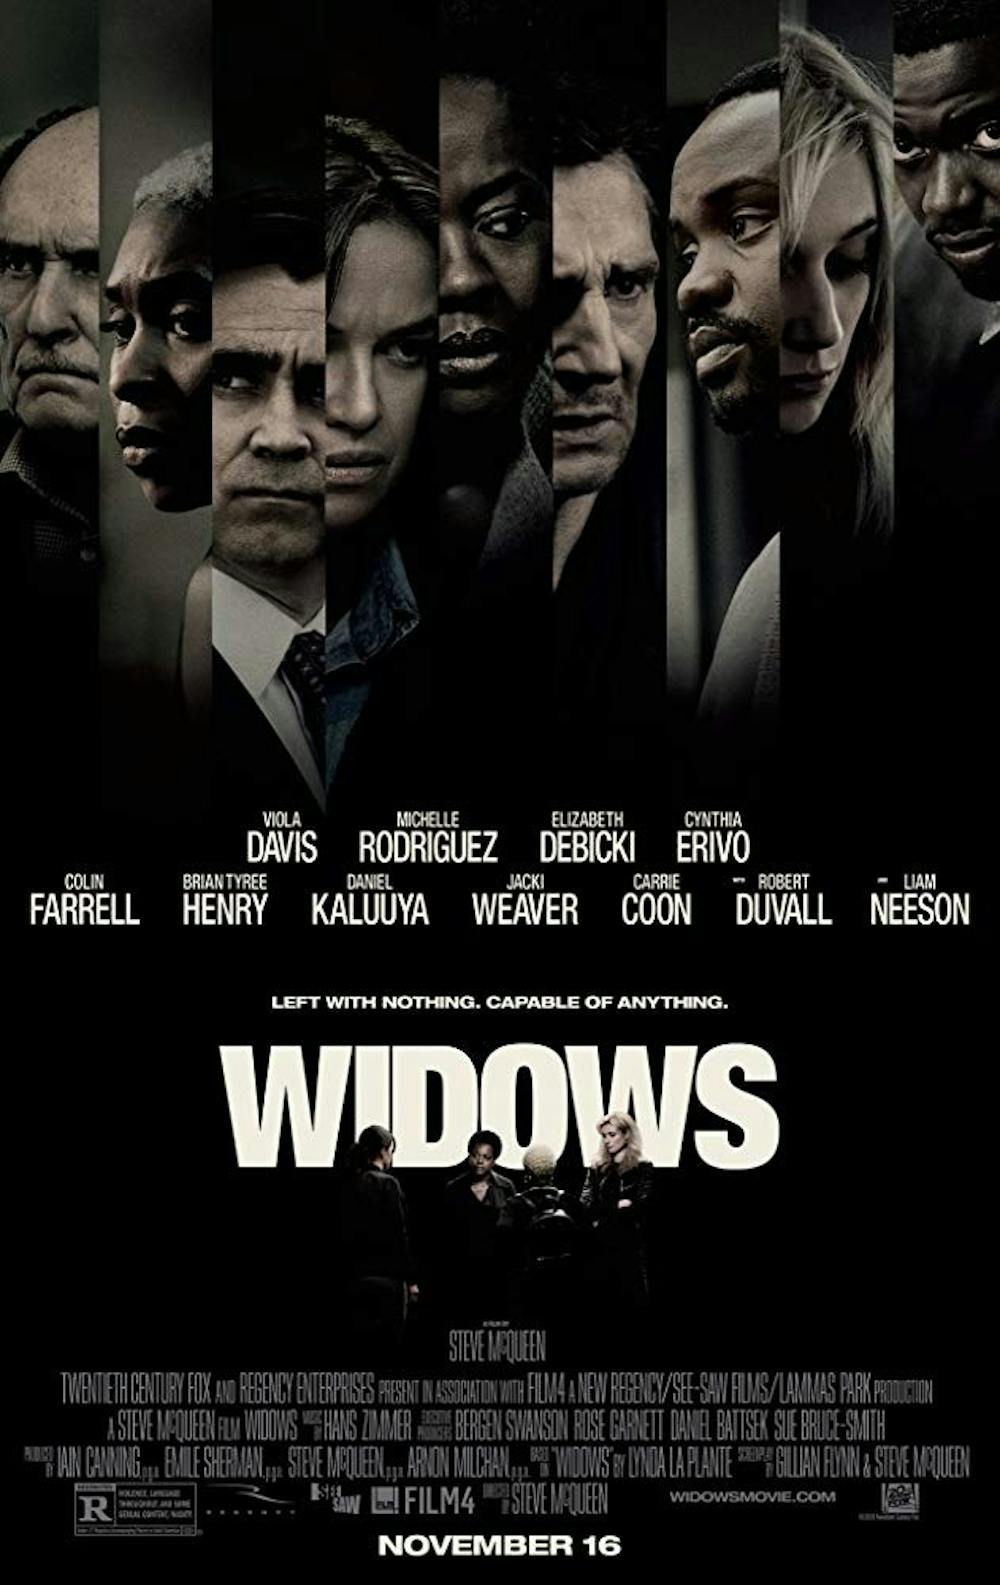 <p>Steve McQueen's latest film "Widows" takes the heist movie to a new level by pairing a fast-paced experience with real character development.</p>